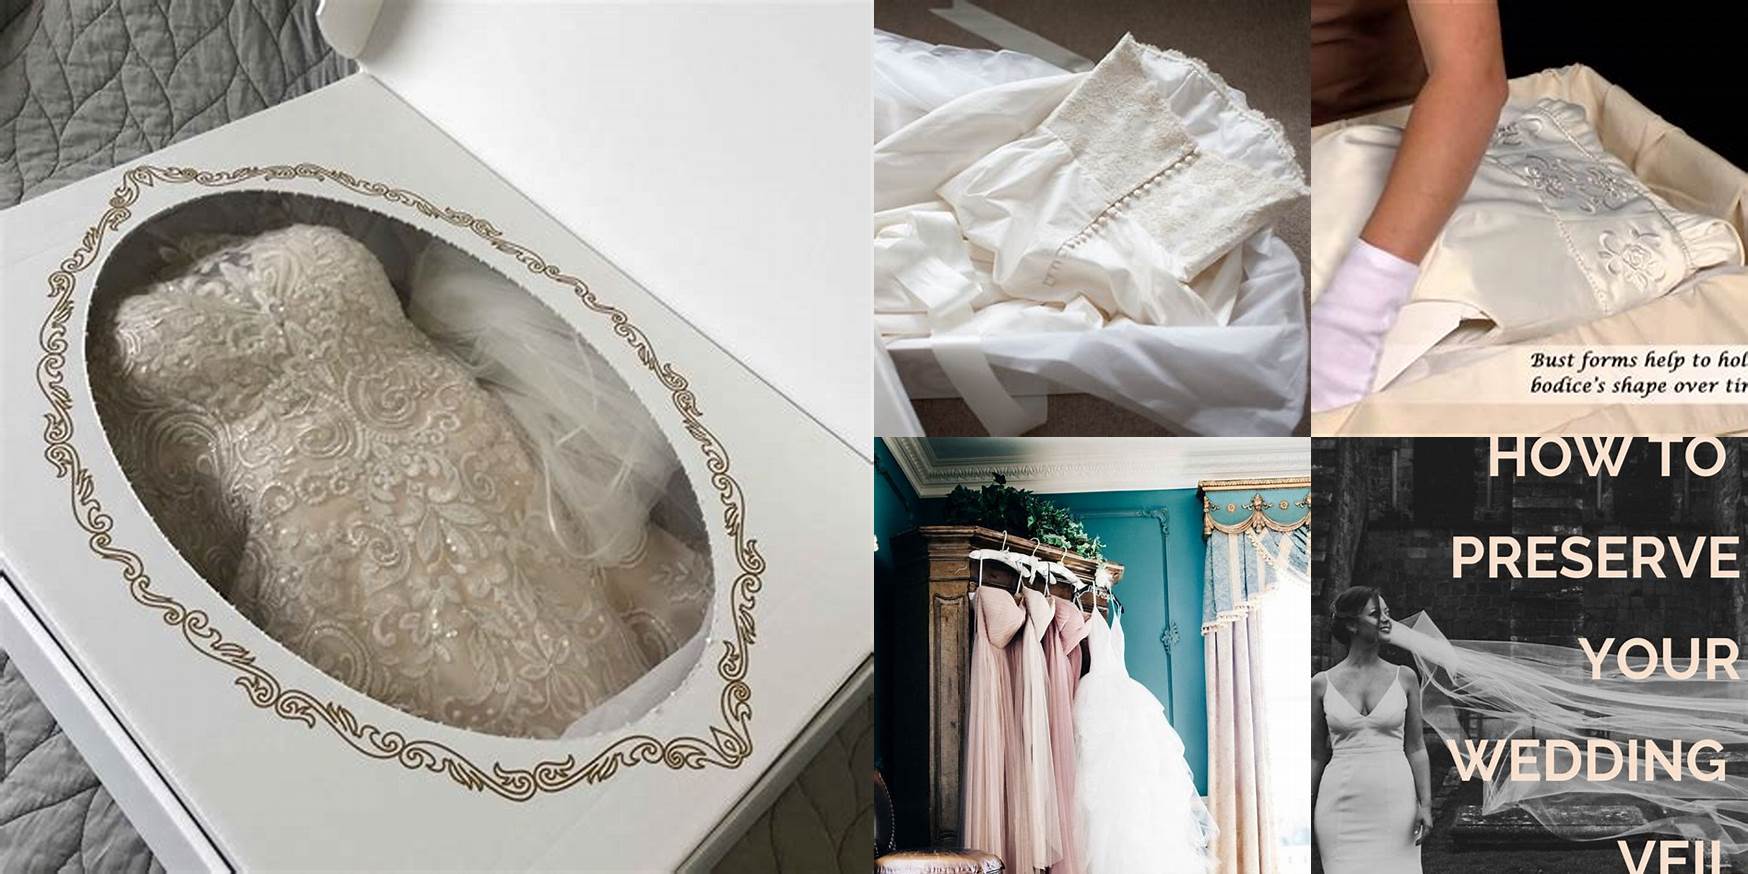 What Does Preserving A Wedding Dress Mean